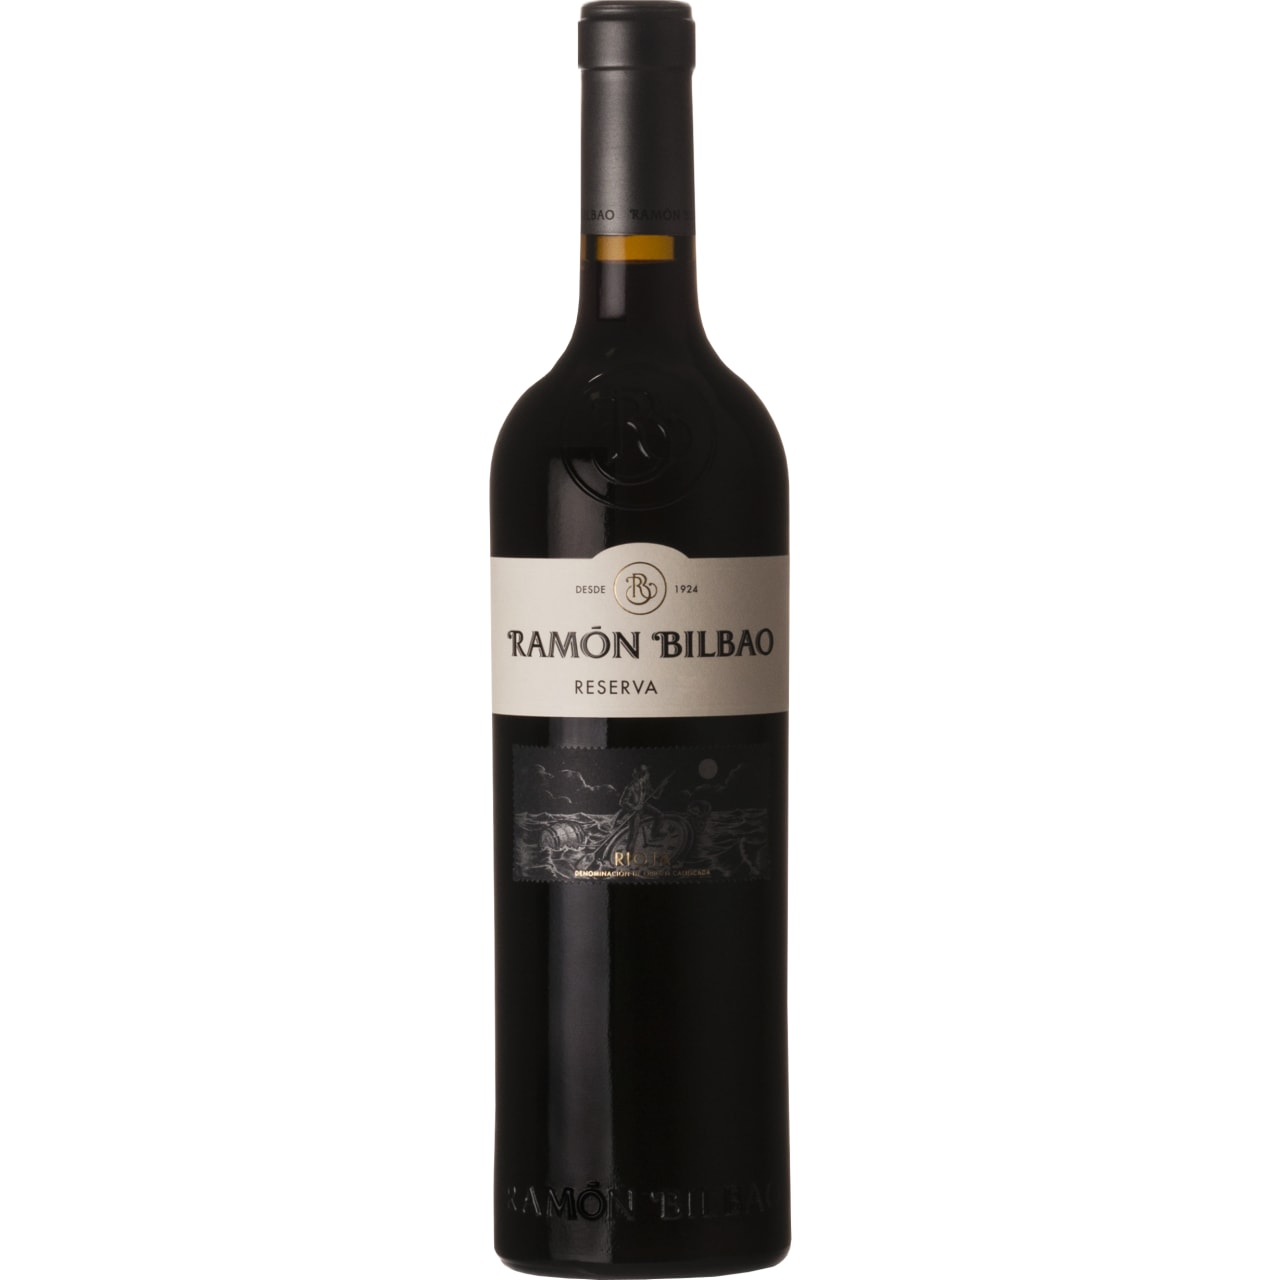 Sumptuous and classic, with lush blackberry fruit intermingled with deep, chocolatey richness and complex nuances of cedar, leather and spice. Rich and velvety in texture, it has superb balance on the palate, and a long finish.